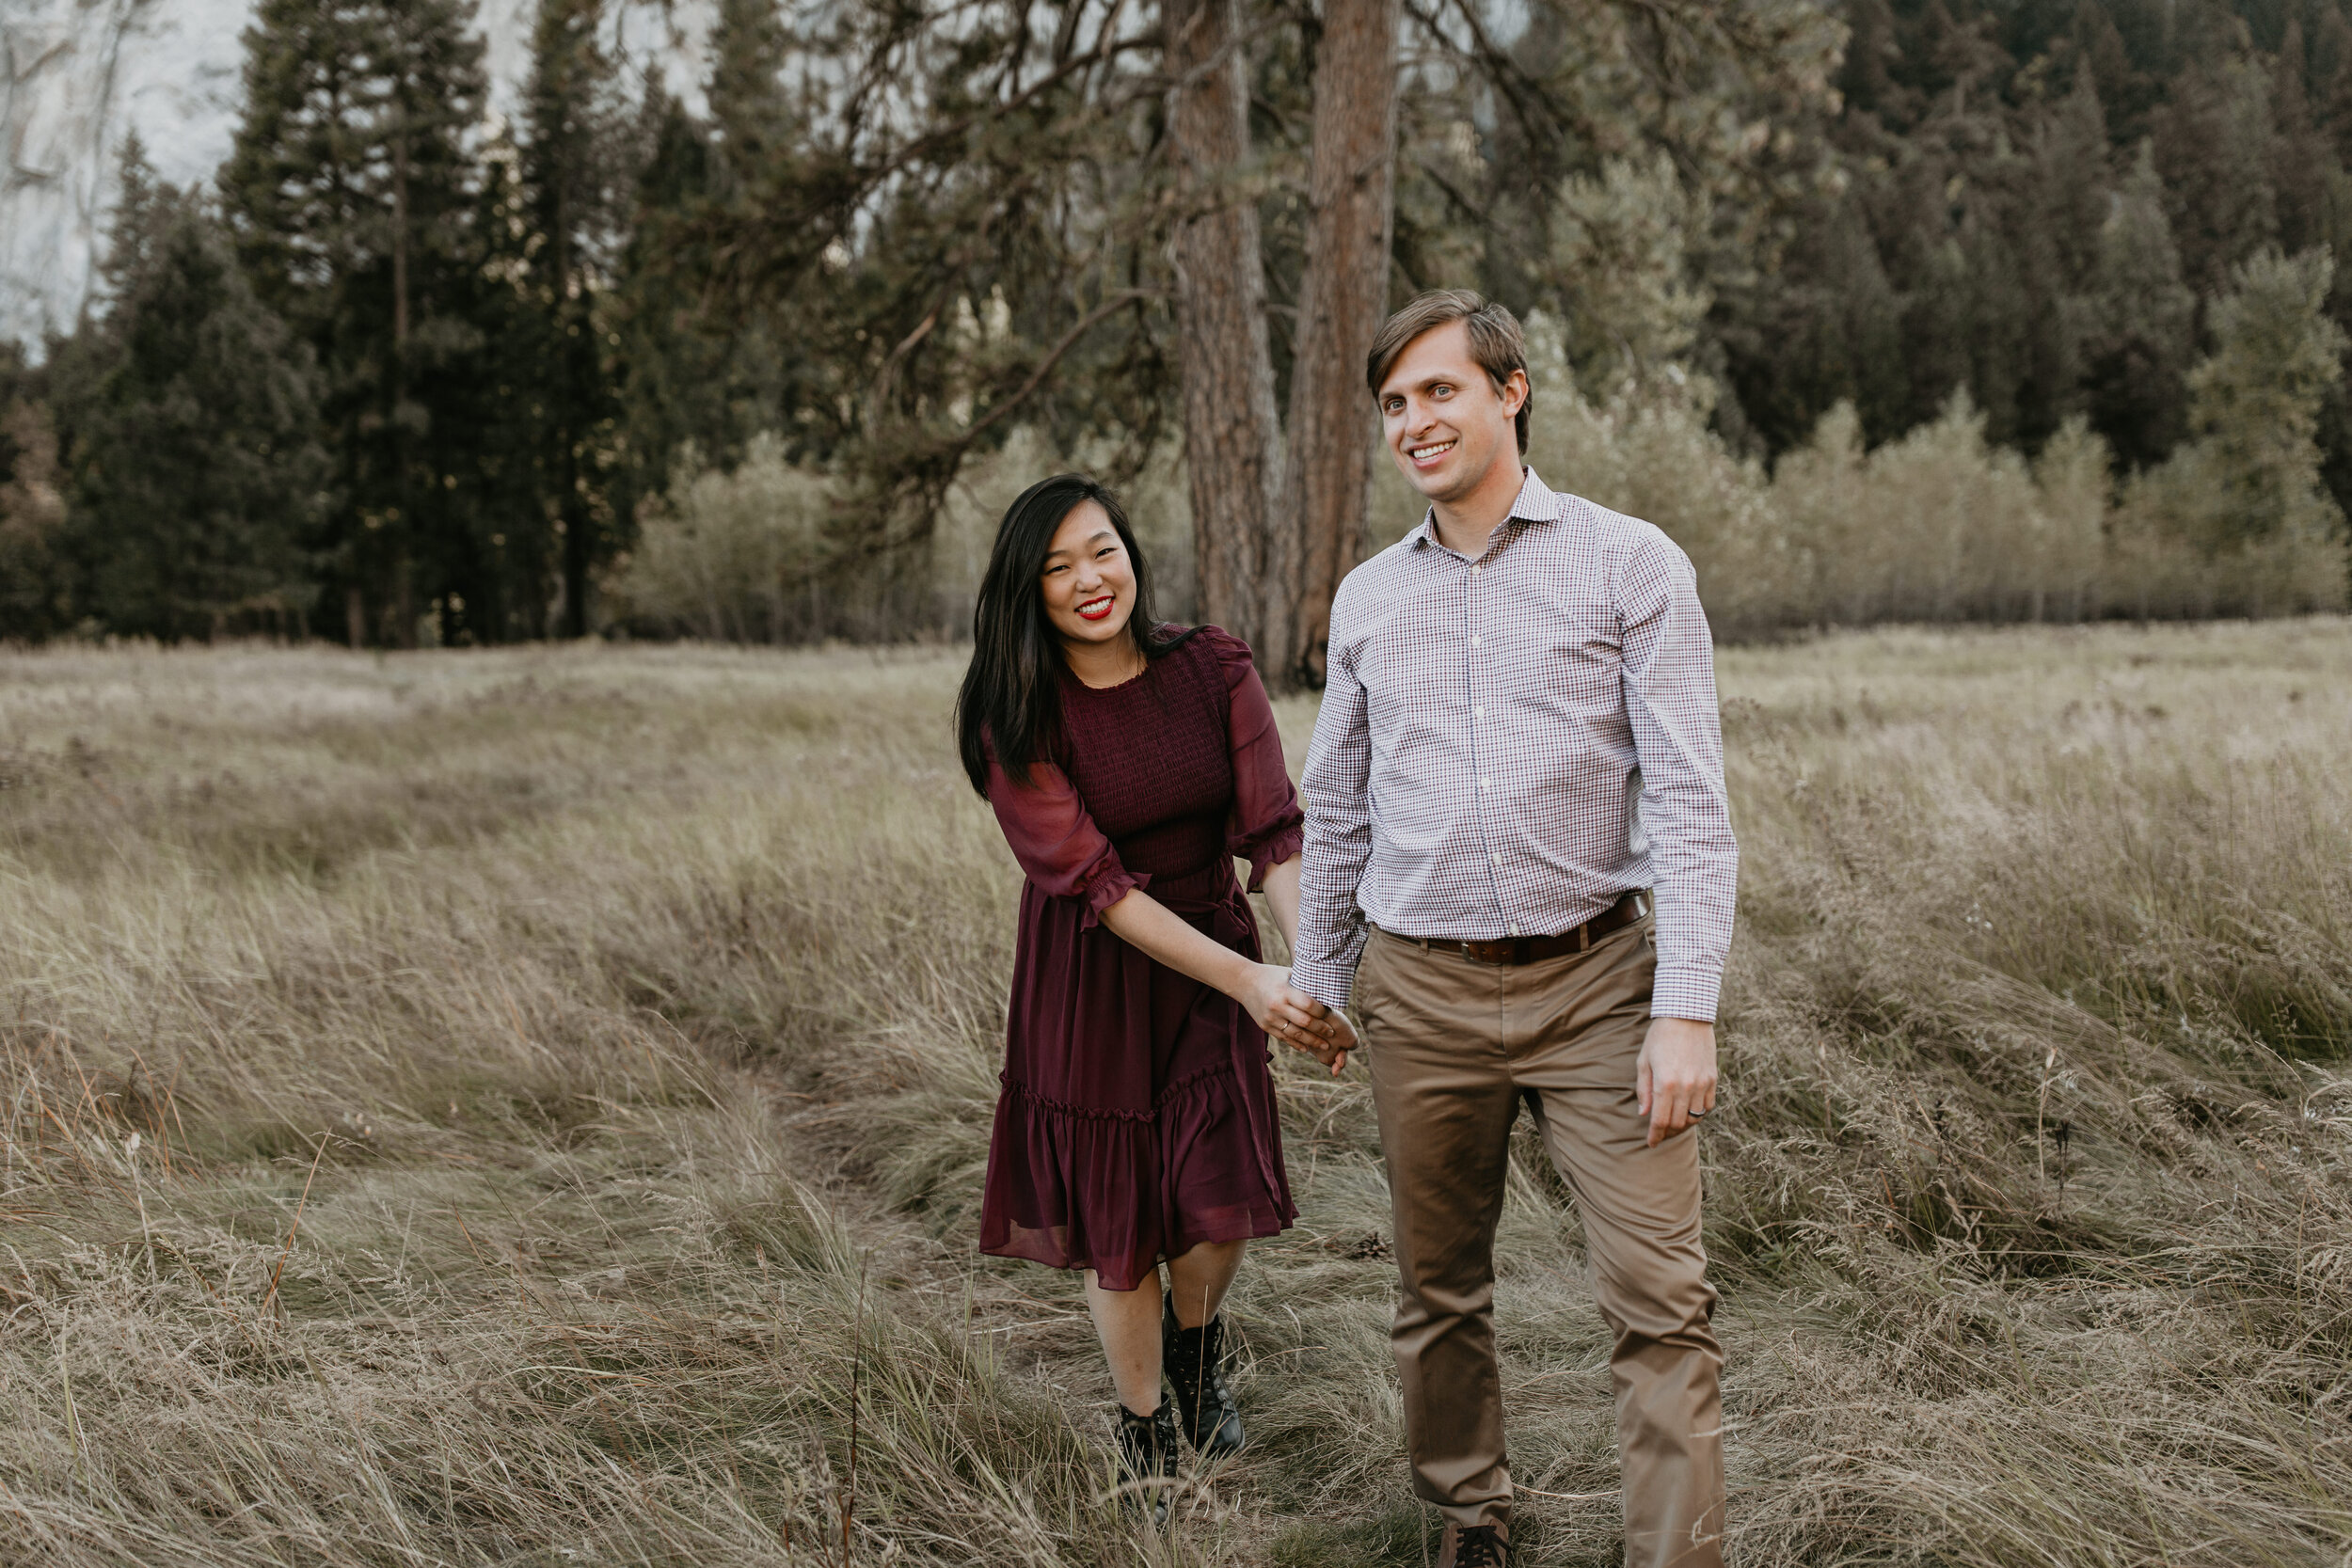 yosemite-national-park-couples-session-at-taft-point-and-yosemite-valley-yosemite-elopement-photographer-nicole-daacke-photography-106.jpg